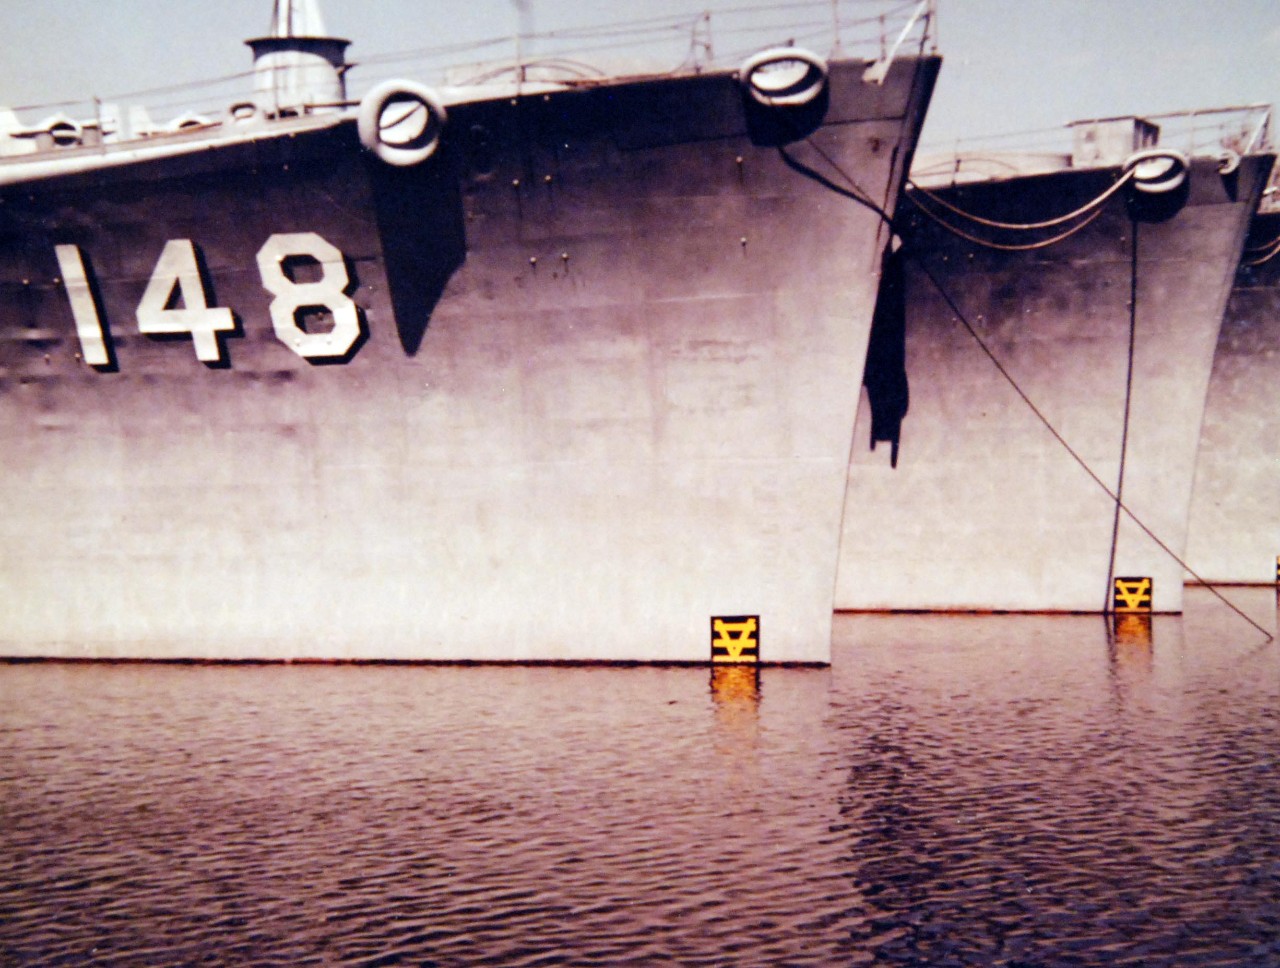 428-GX-K-128499:   Philadelphia Naval Shipyard, Pennsylvania, April 1980.   View from the water looking across starboard bows of, in turn, USS Newport News (CA-148), USS Salem (CA-139), and USS Des Moines (CA-134).  The heavy cruisers are part of the mothball fleet.     Official U.S. Navy Photograph, now in the collections of the National Archives.  (2017/10/25).  